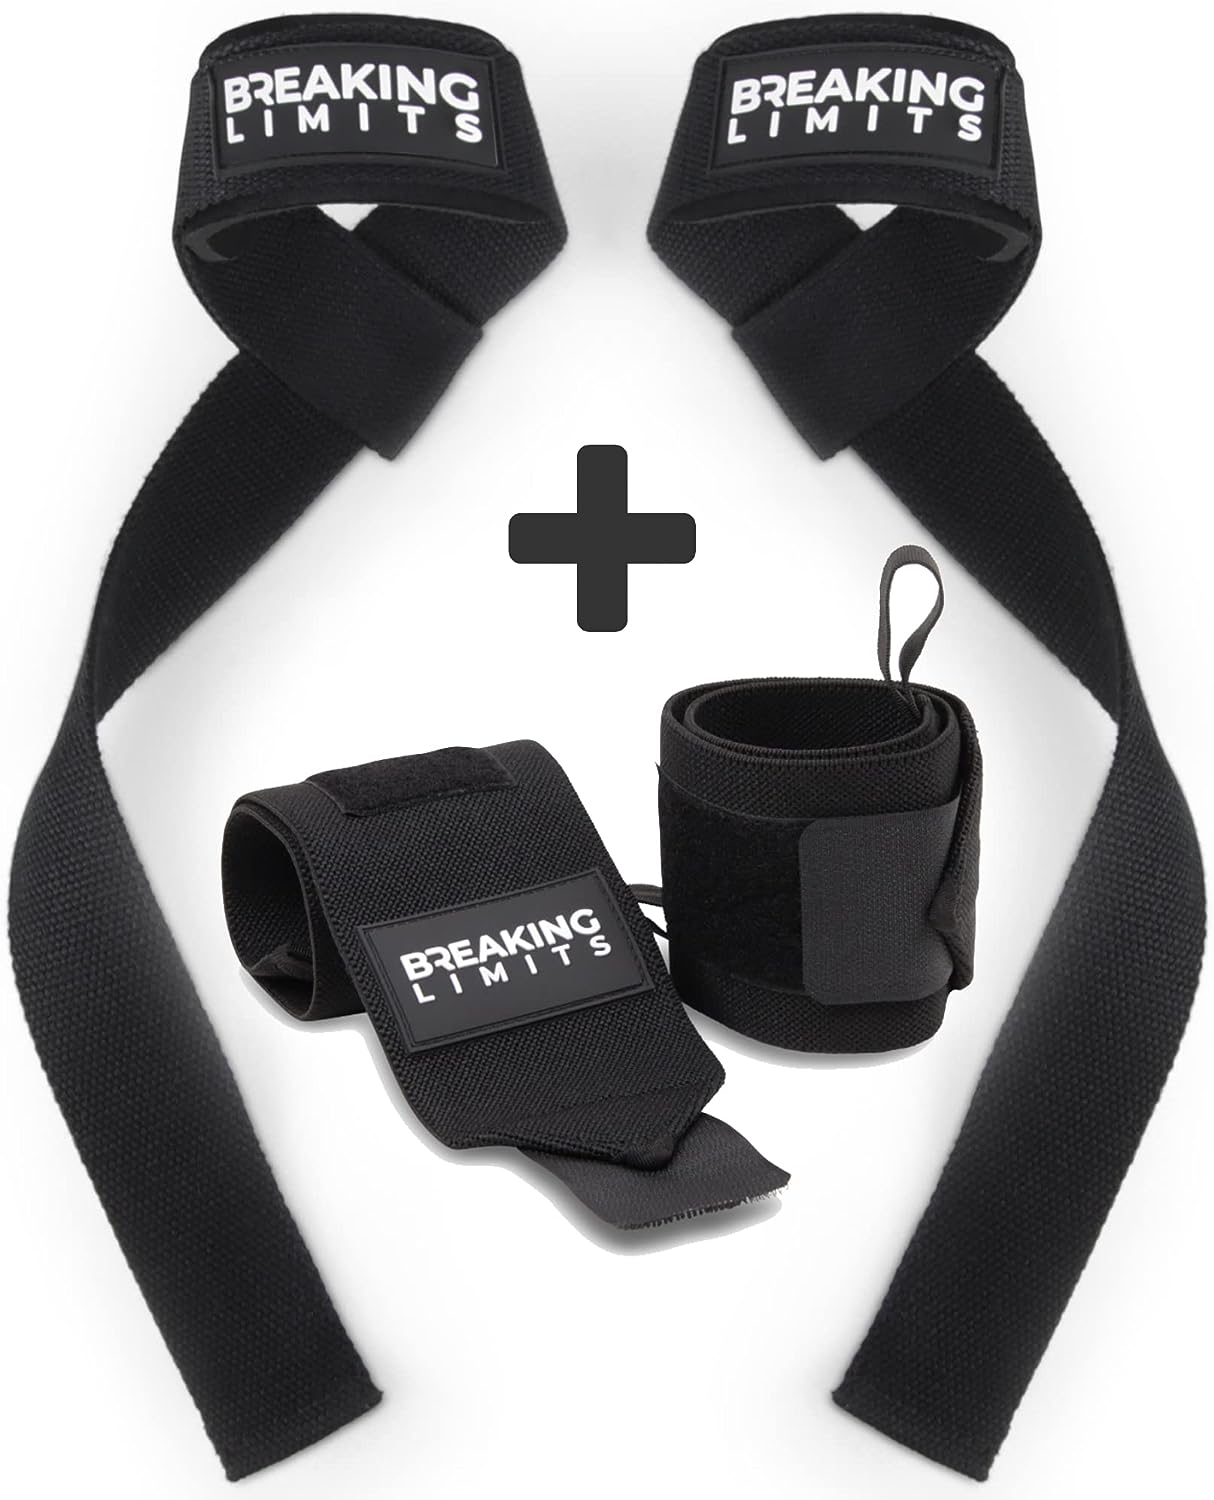 BREAKING LIMITS Set of Lifting Straps  Wrist Wraps - 2 Wrist Bandages, 2 Lifting Aids - Strength Training, Weight Lifting, Bodybuilding, Lift Training, Powerlifting, One Size |